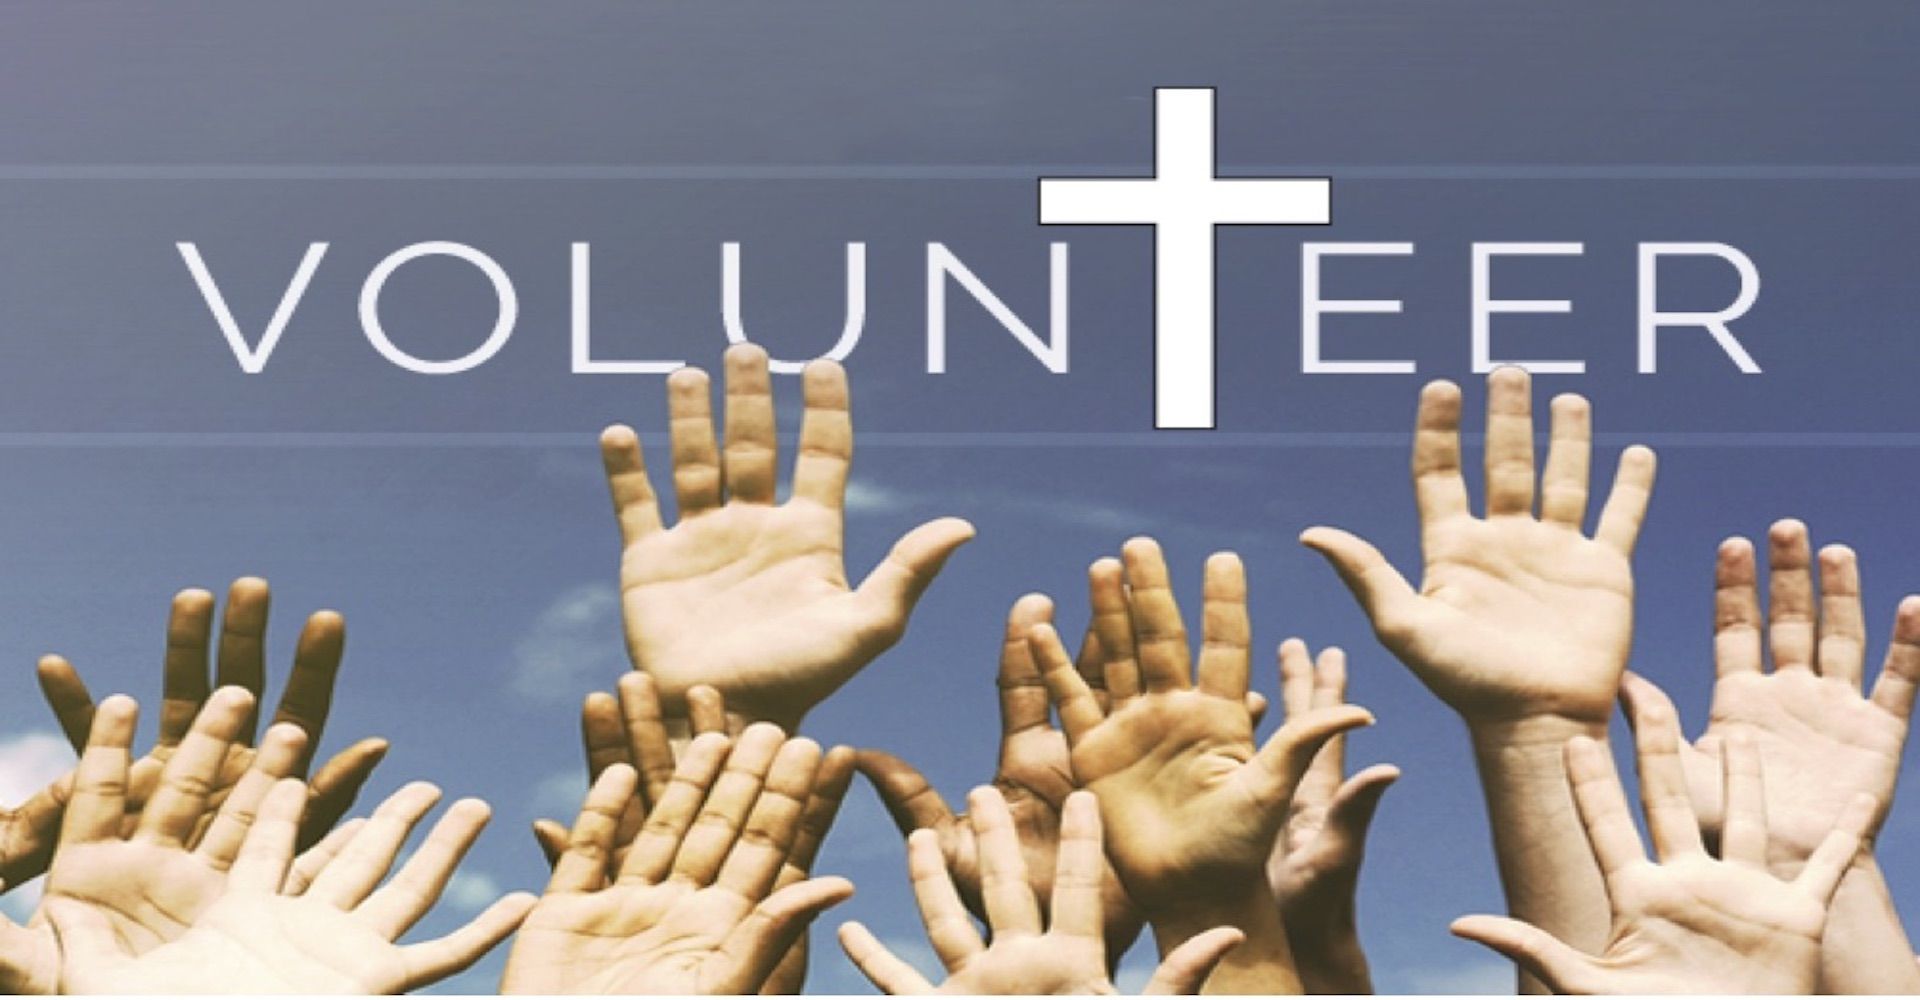 Volunteer in our Parishes - Check out our Volunteer Form